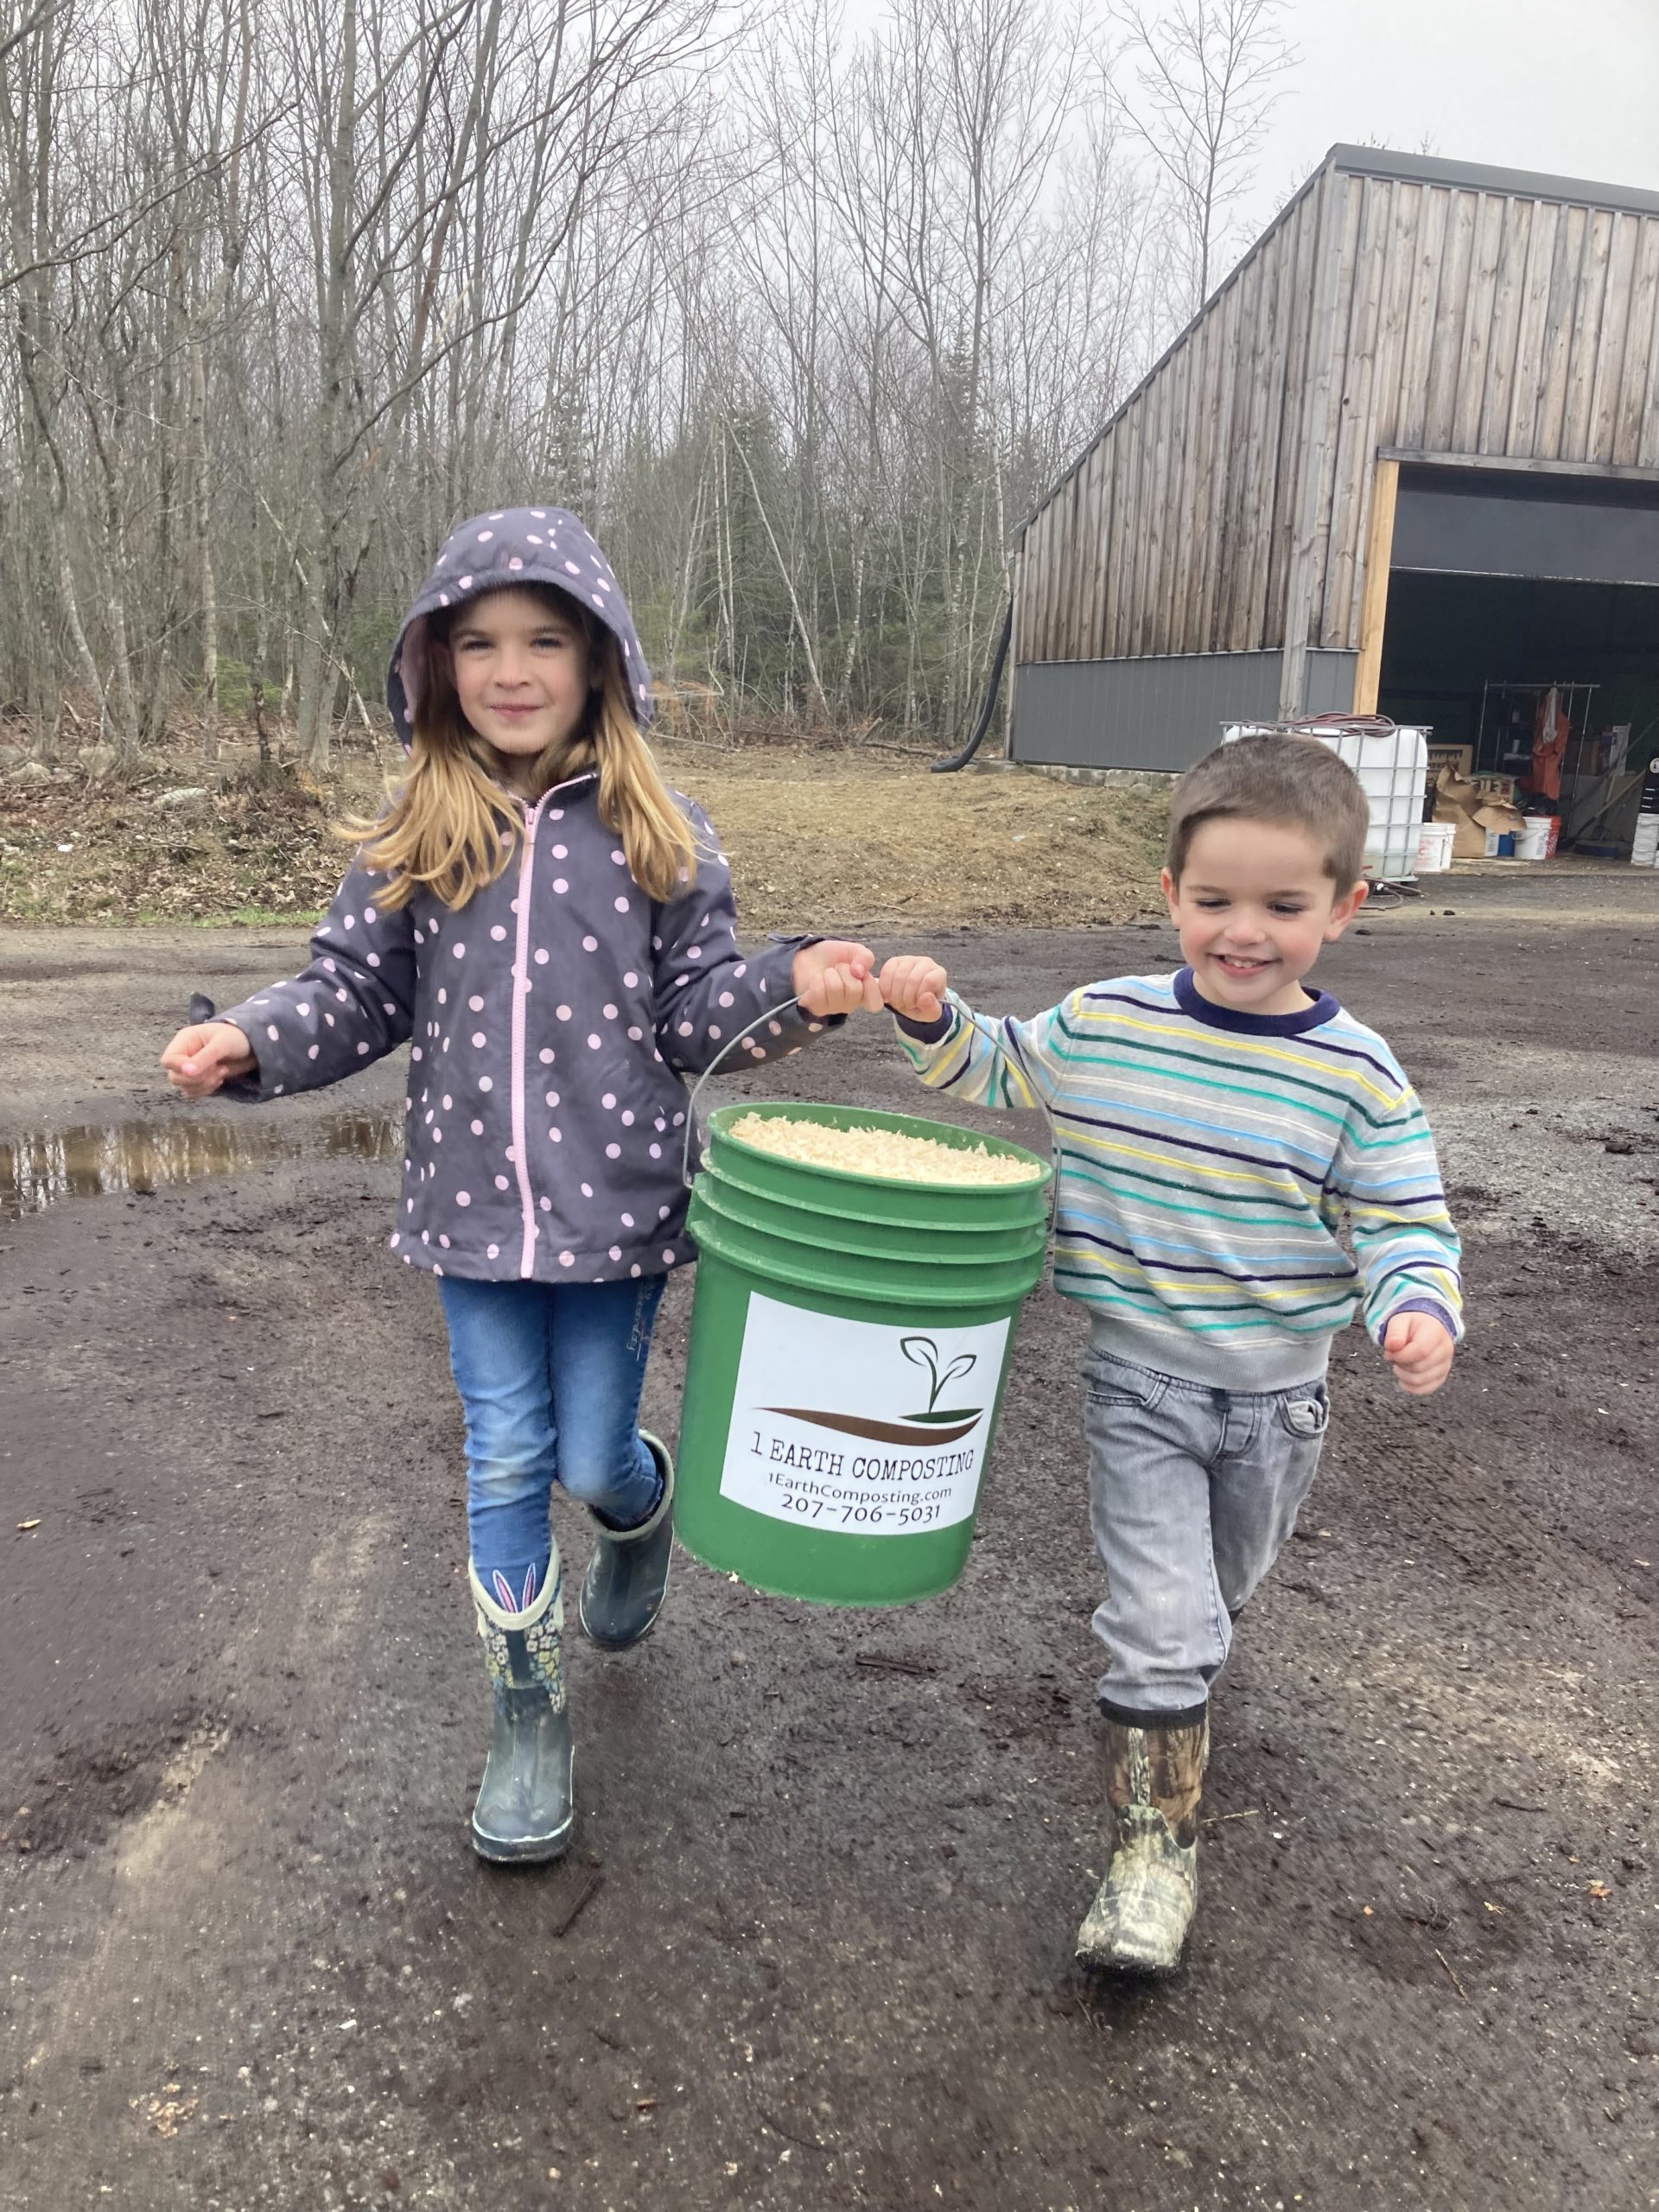 Saunders children helping carry compost bucket for 1 Earth Composting